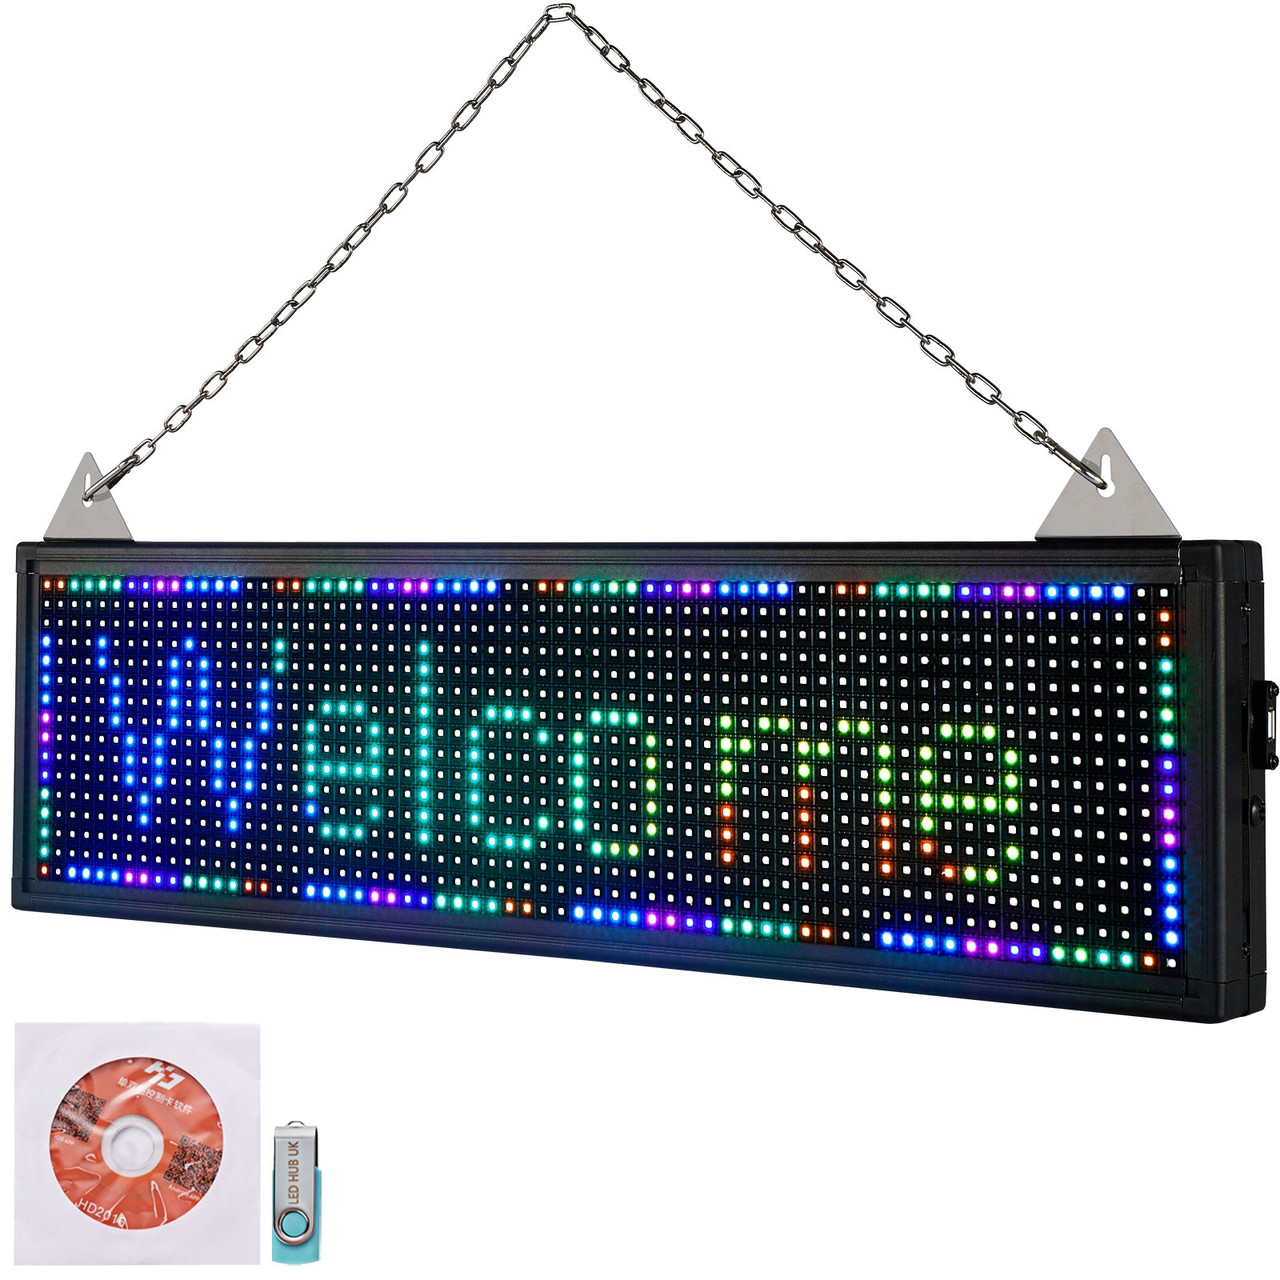 LED Scrolling Sign, 27" x 8" WiFi & USB Control, Full Color P10 Programmable Display, Indoor High Resolution Message Board, High Brightness Electronic Sign, Perfect Solution for Advertising